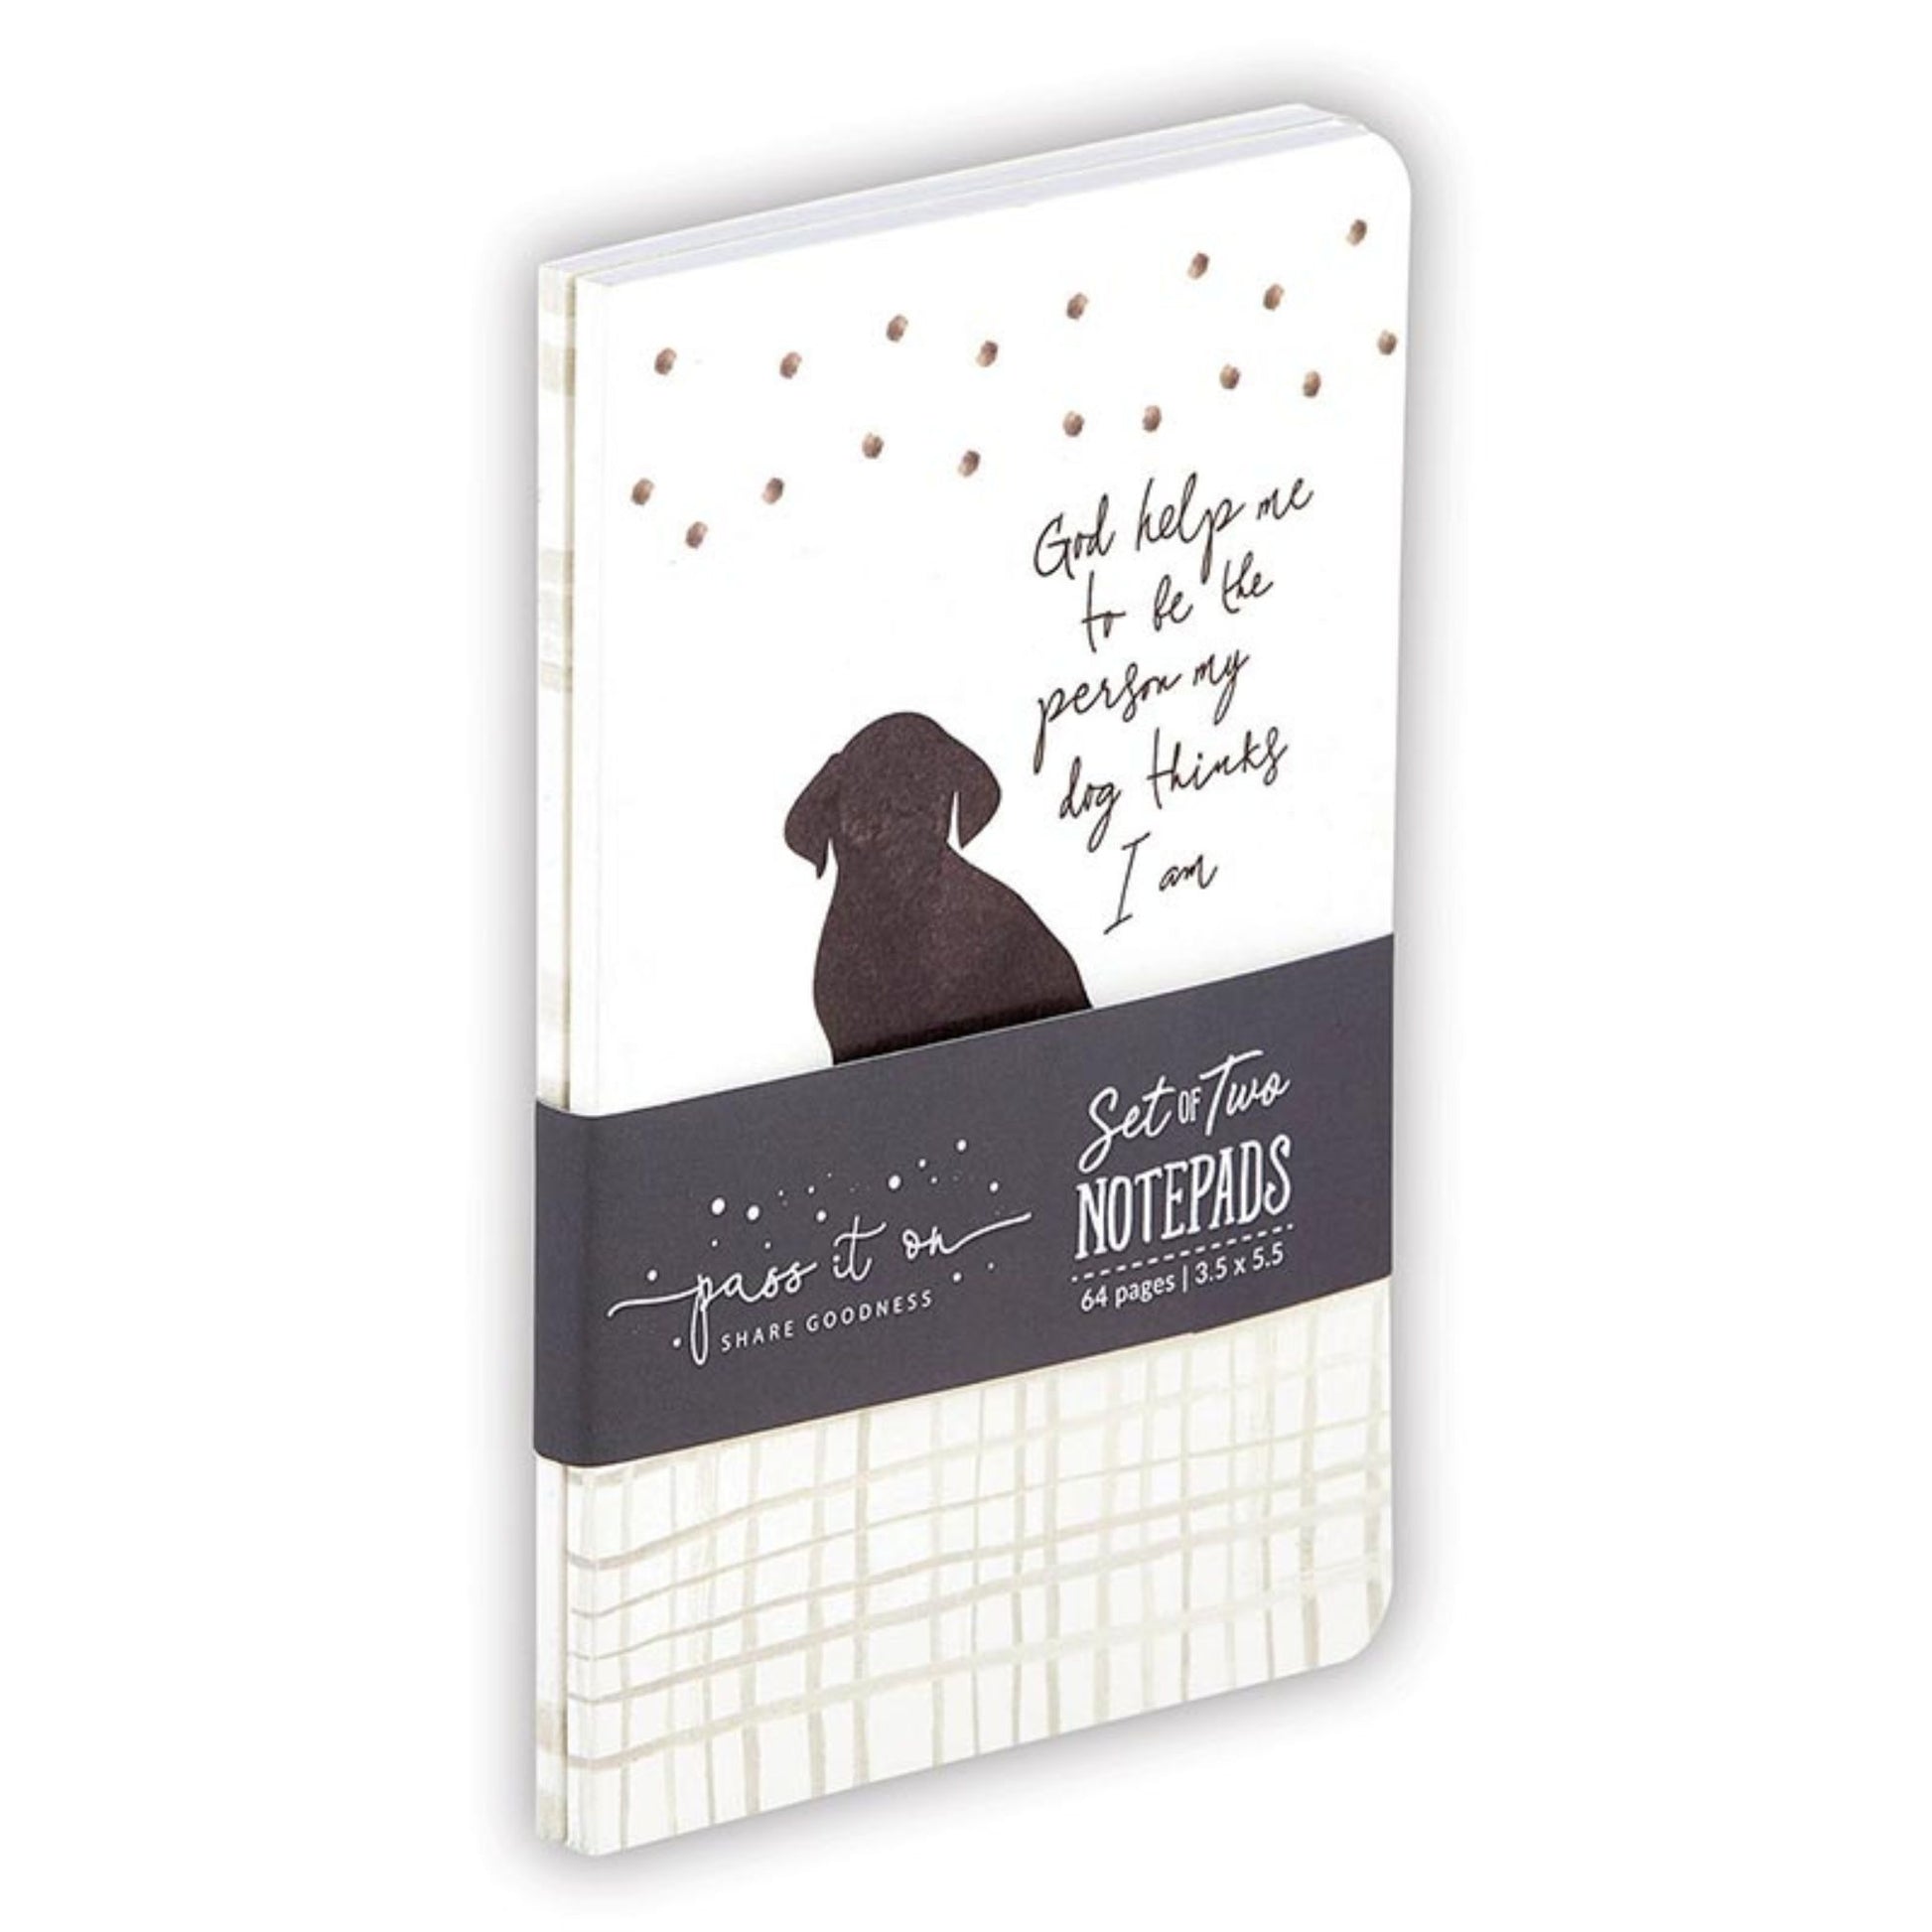 Pet Lover Notepads - God help me to be the person my dog thinks I am - Pawprint set of two notepads | Inspirational Notepad Set | oak7west.com